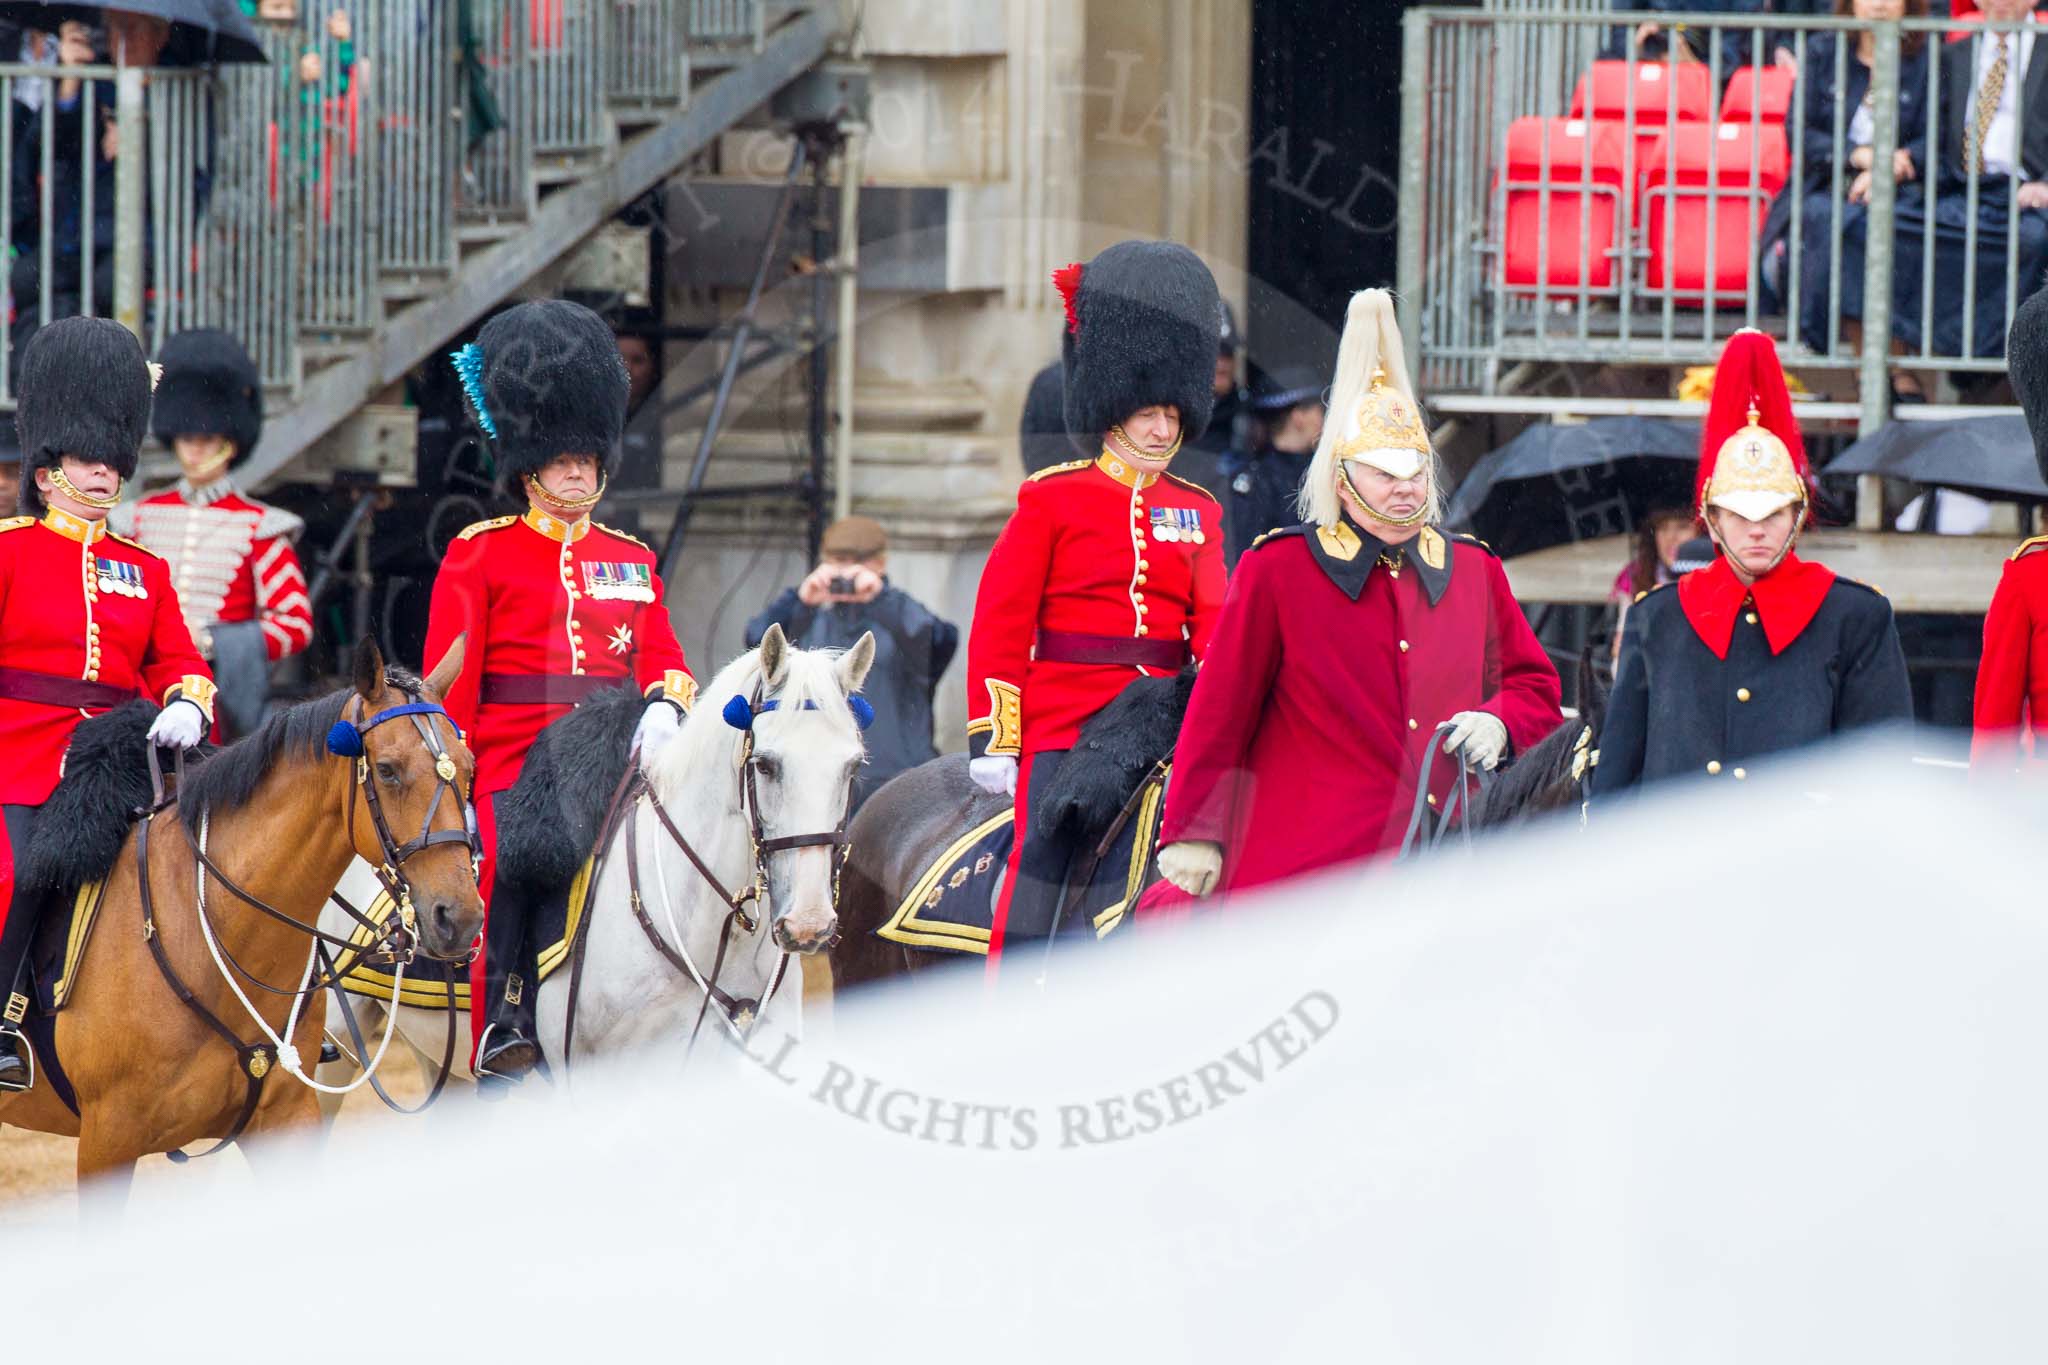 The Colonel's Review 2014.
Horse Guards Parade, Westminster,
London,

United Kingdom,
on 07 June 2014 at 10:59, image #265